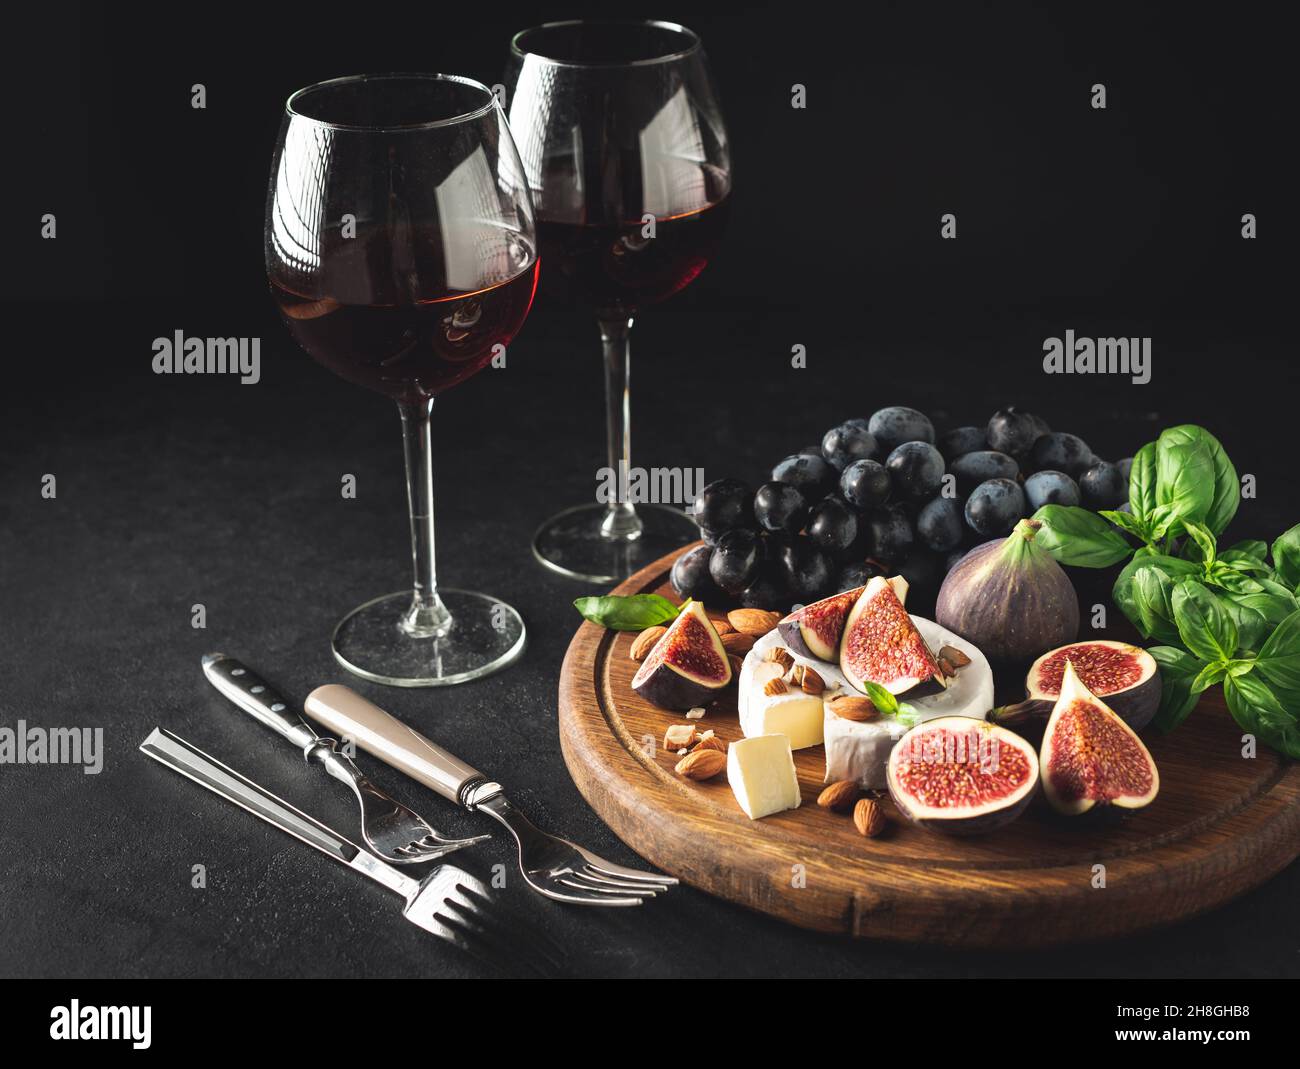 Gourmet wine and cheese appetizer set with camembert and figs. Dark toned image, copy space. Still life Stock Photo